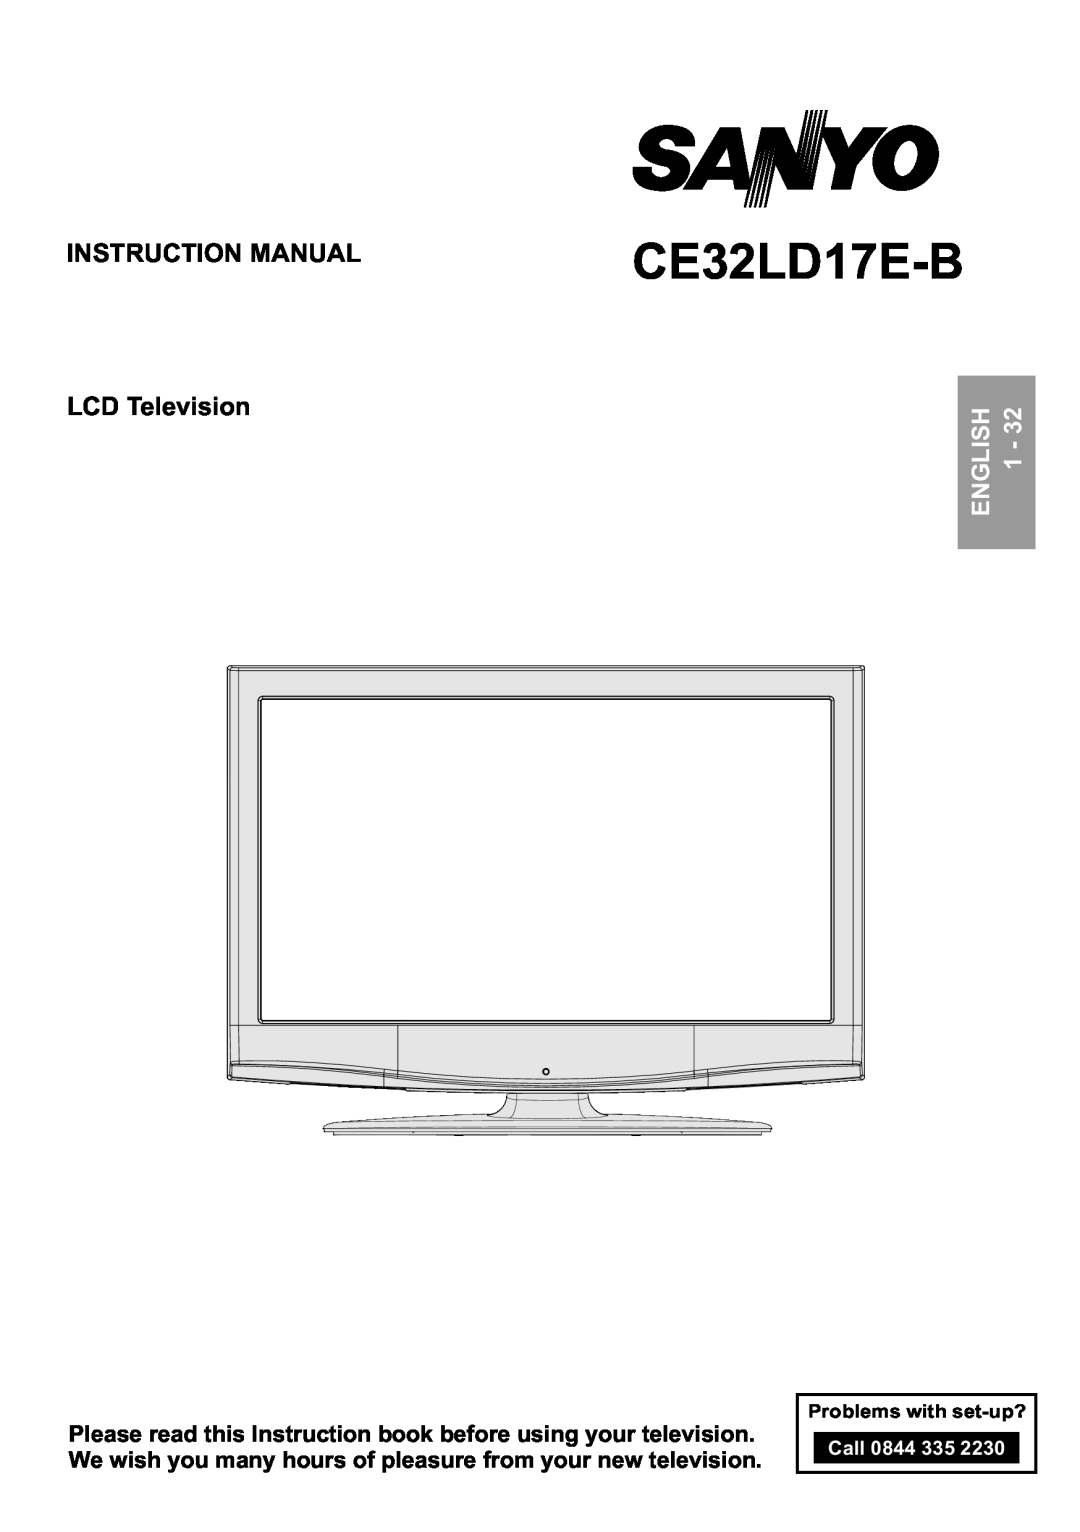 Sanyo CE32LD17E-B instruction manual INSTRUCTION MANUAL LCD Television, English, Problems with set-up?, Call 0844 335 